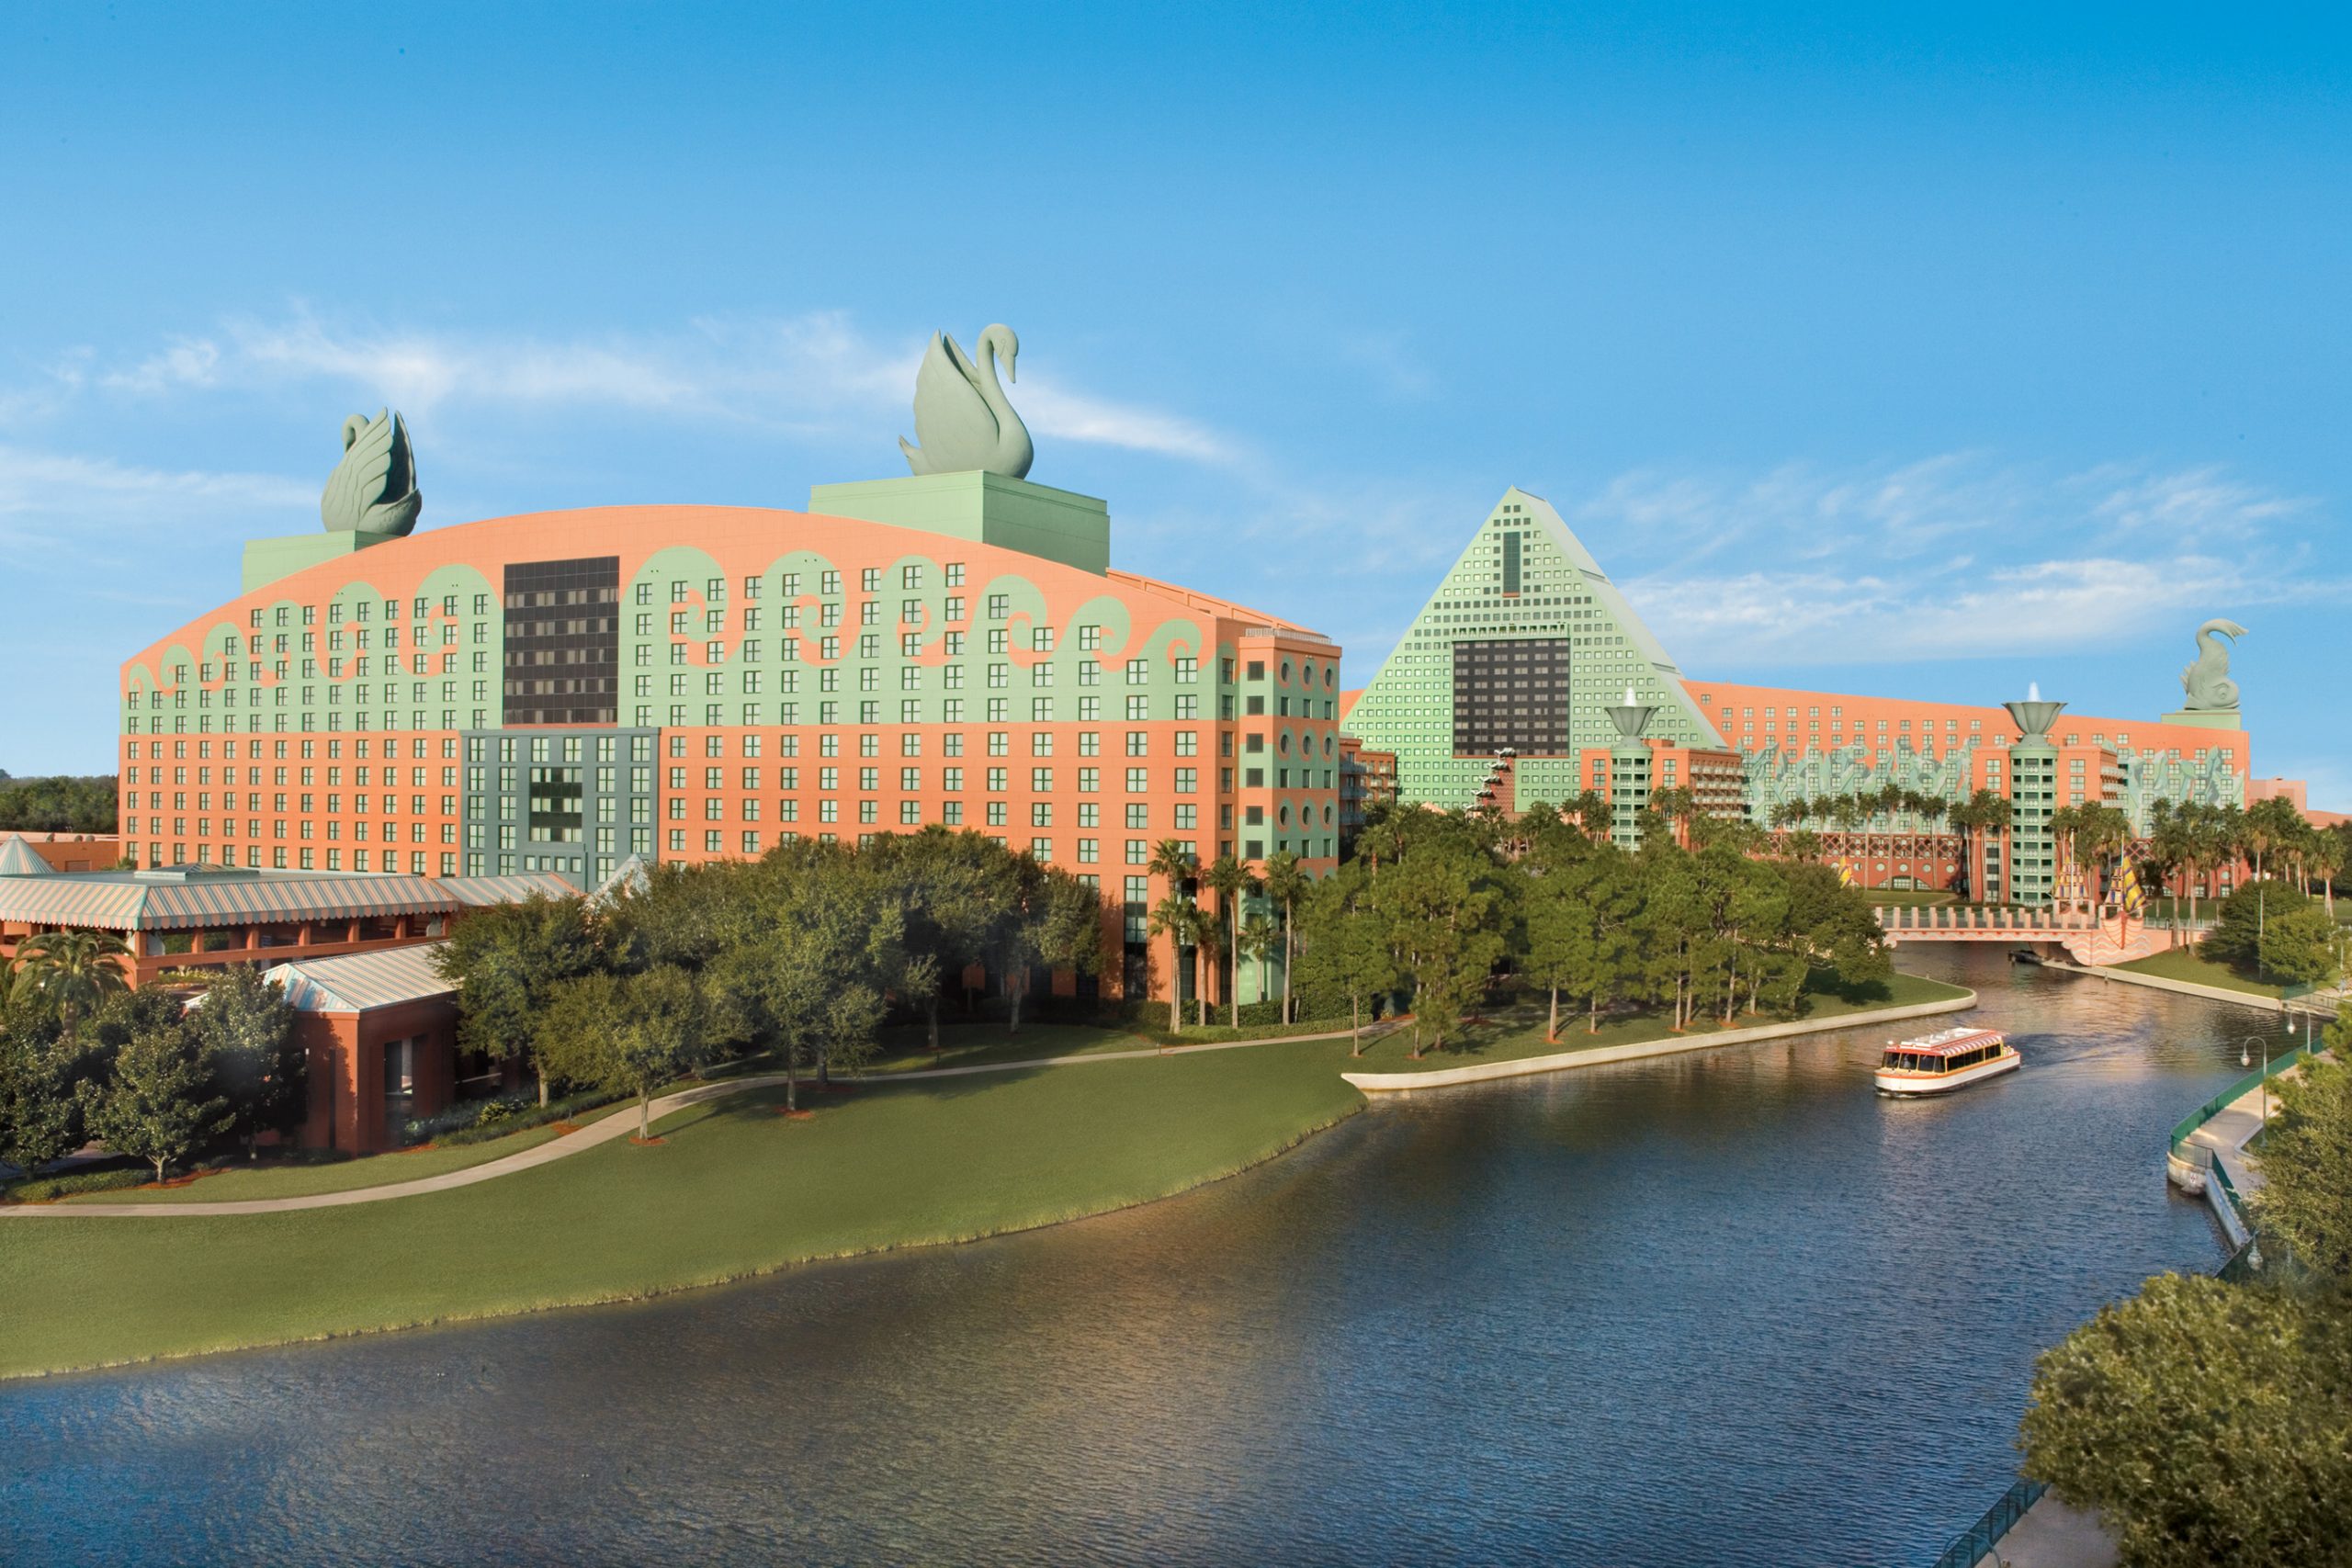 Disney Swan and Dolphin Resort is now offering up to a 30% discount for Annual Passholders